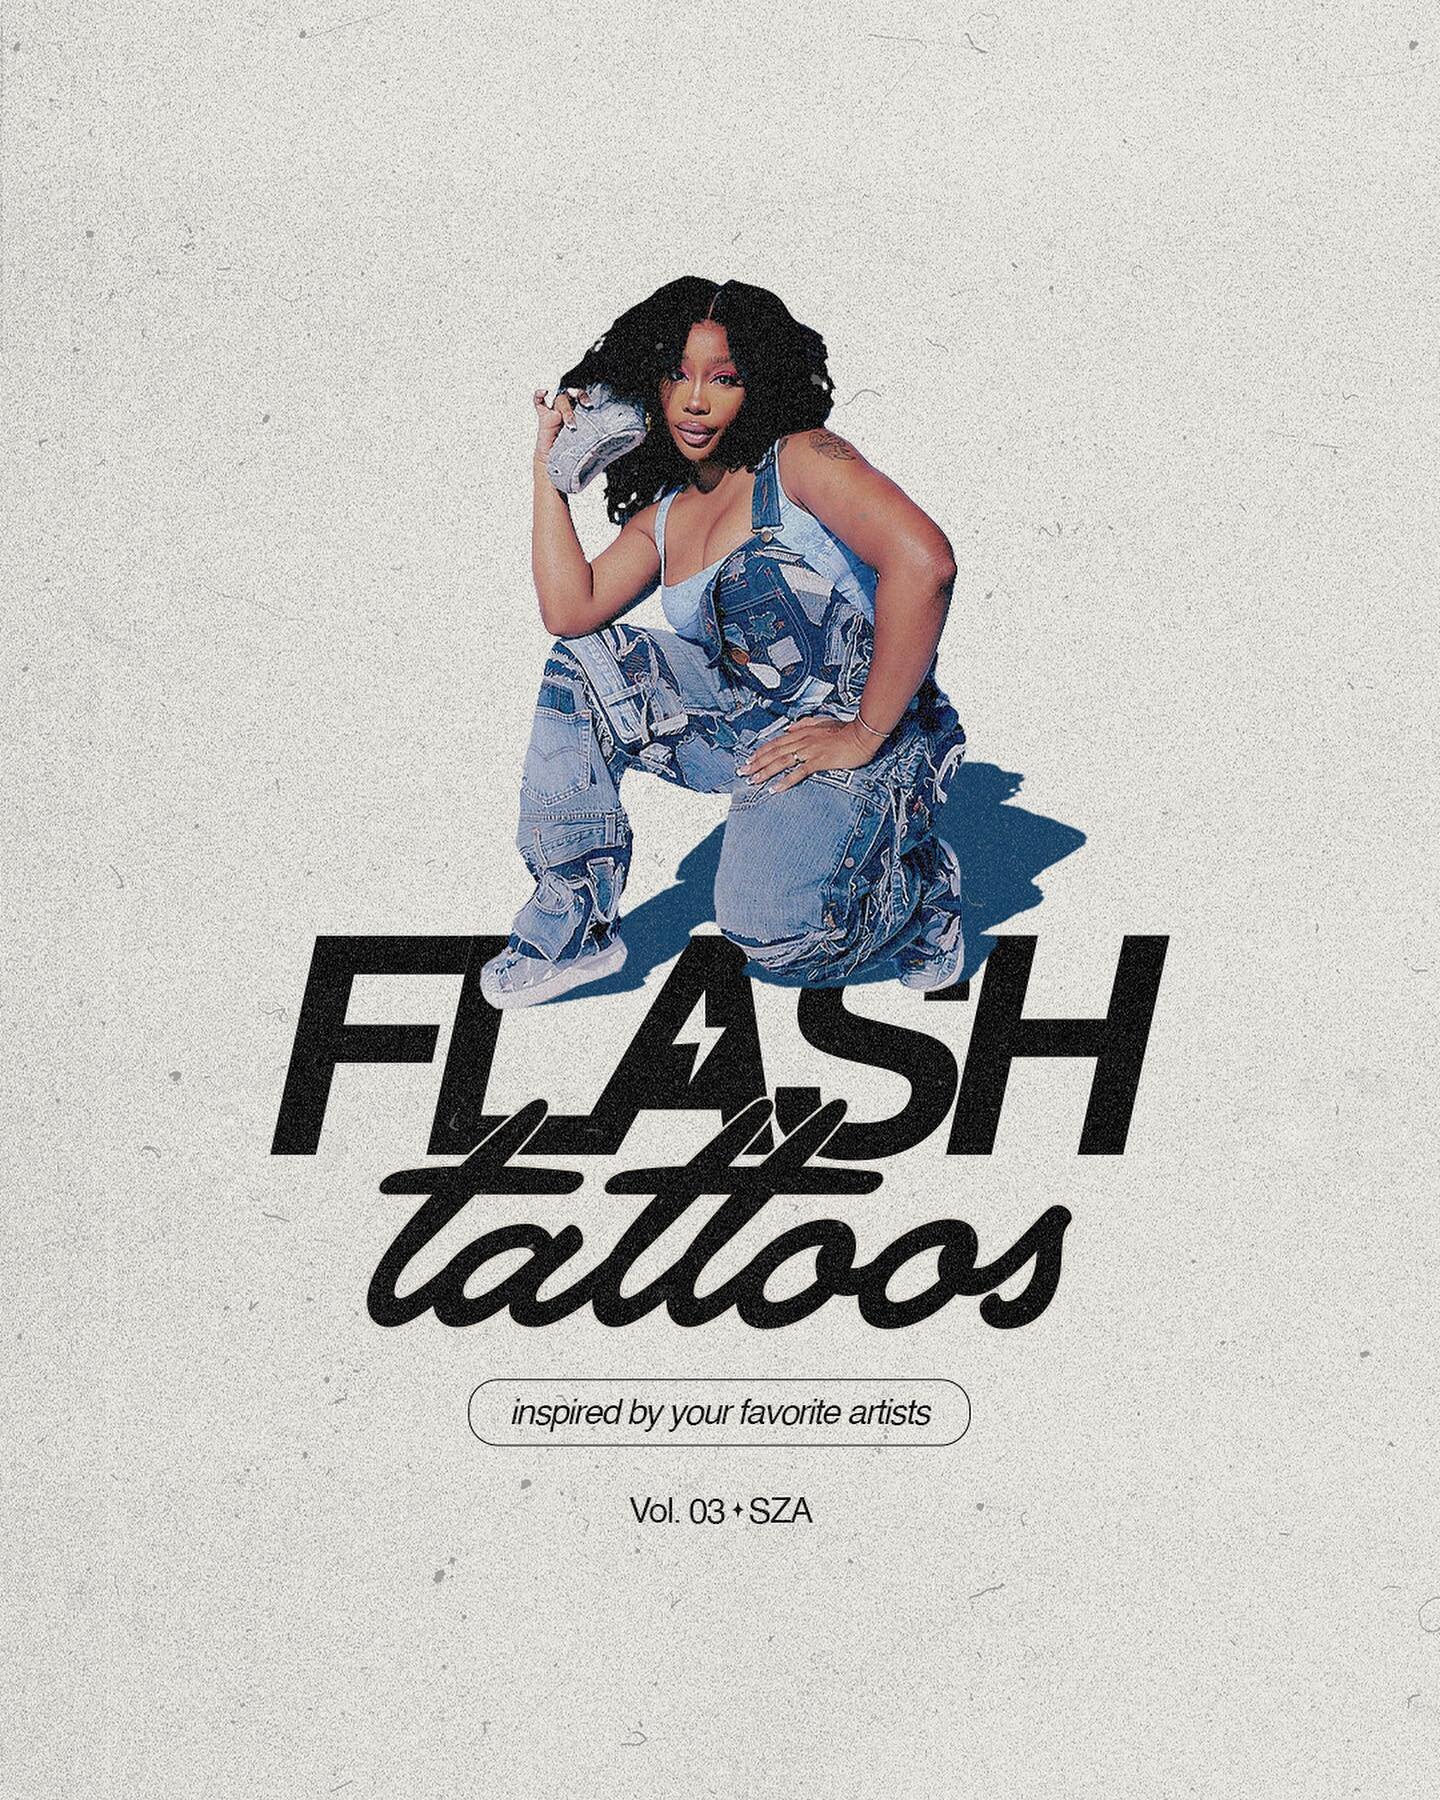 My top artist all year has been the one and only&hellip; miss @sza 😩👑✨ so i HAD to make a flash tattoo sheet inspired by her 🥹

This is Volume 3 of Flash Tattoo sheets inspired by your favorite artists! 🎶✍🏼⚡️ But this time, with a brand new look